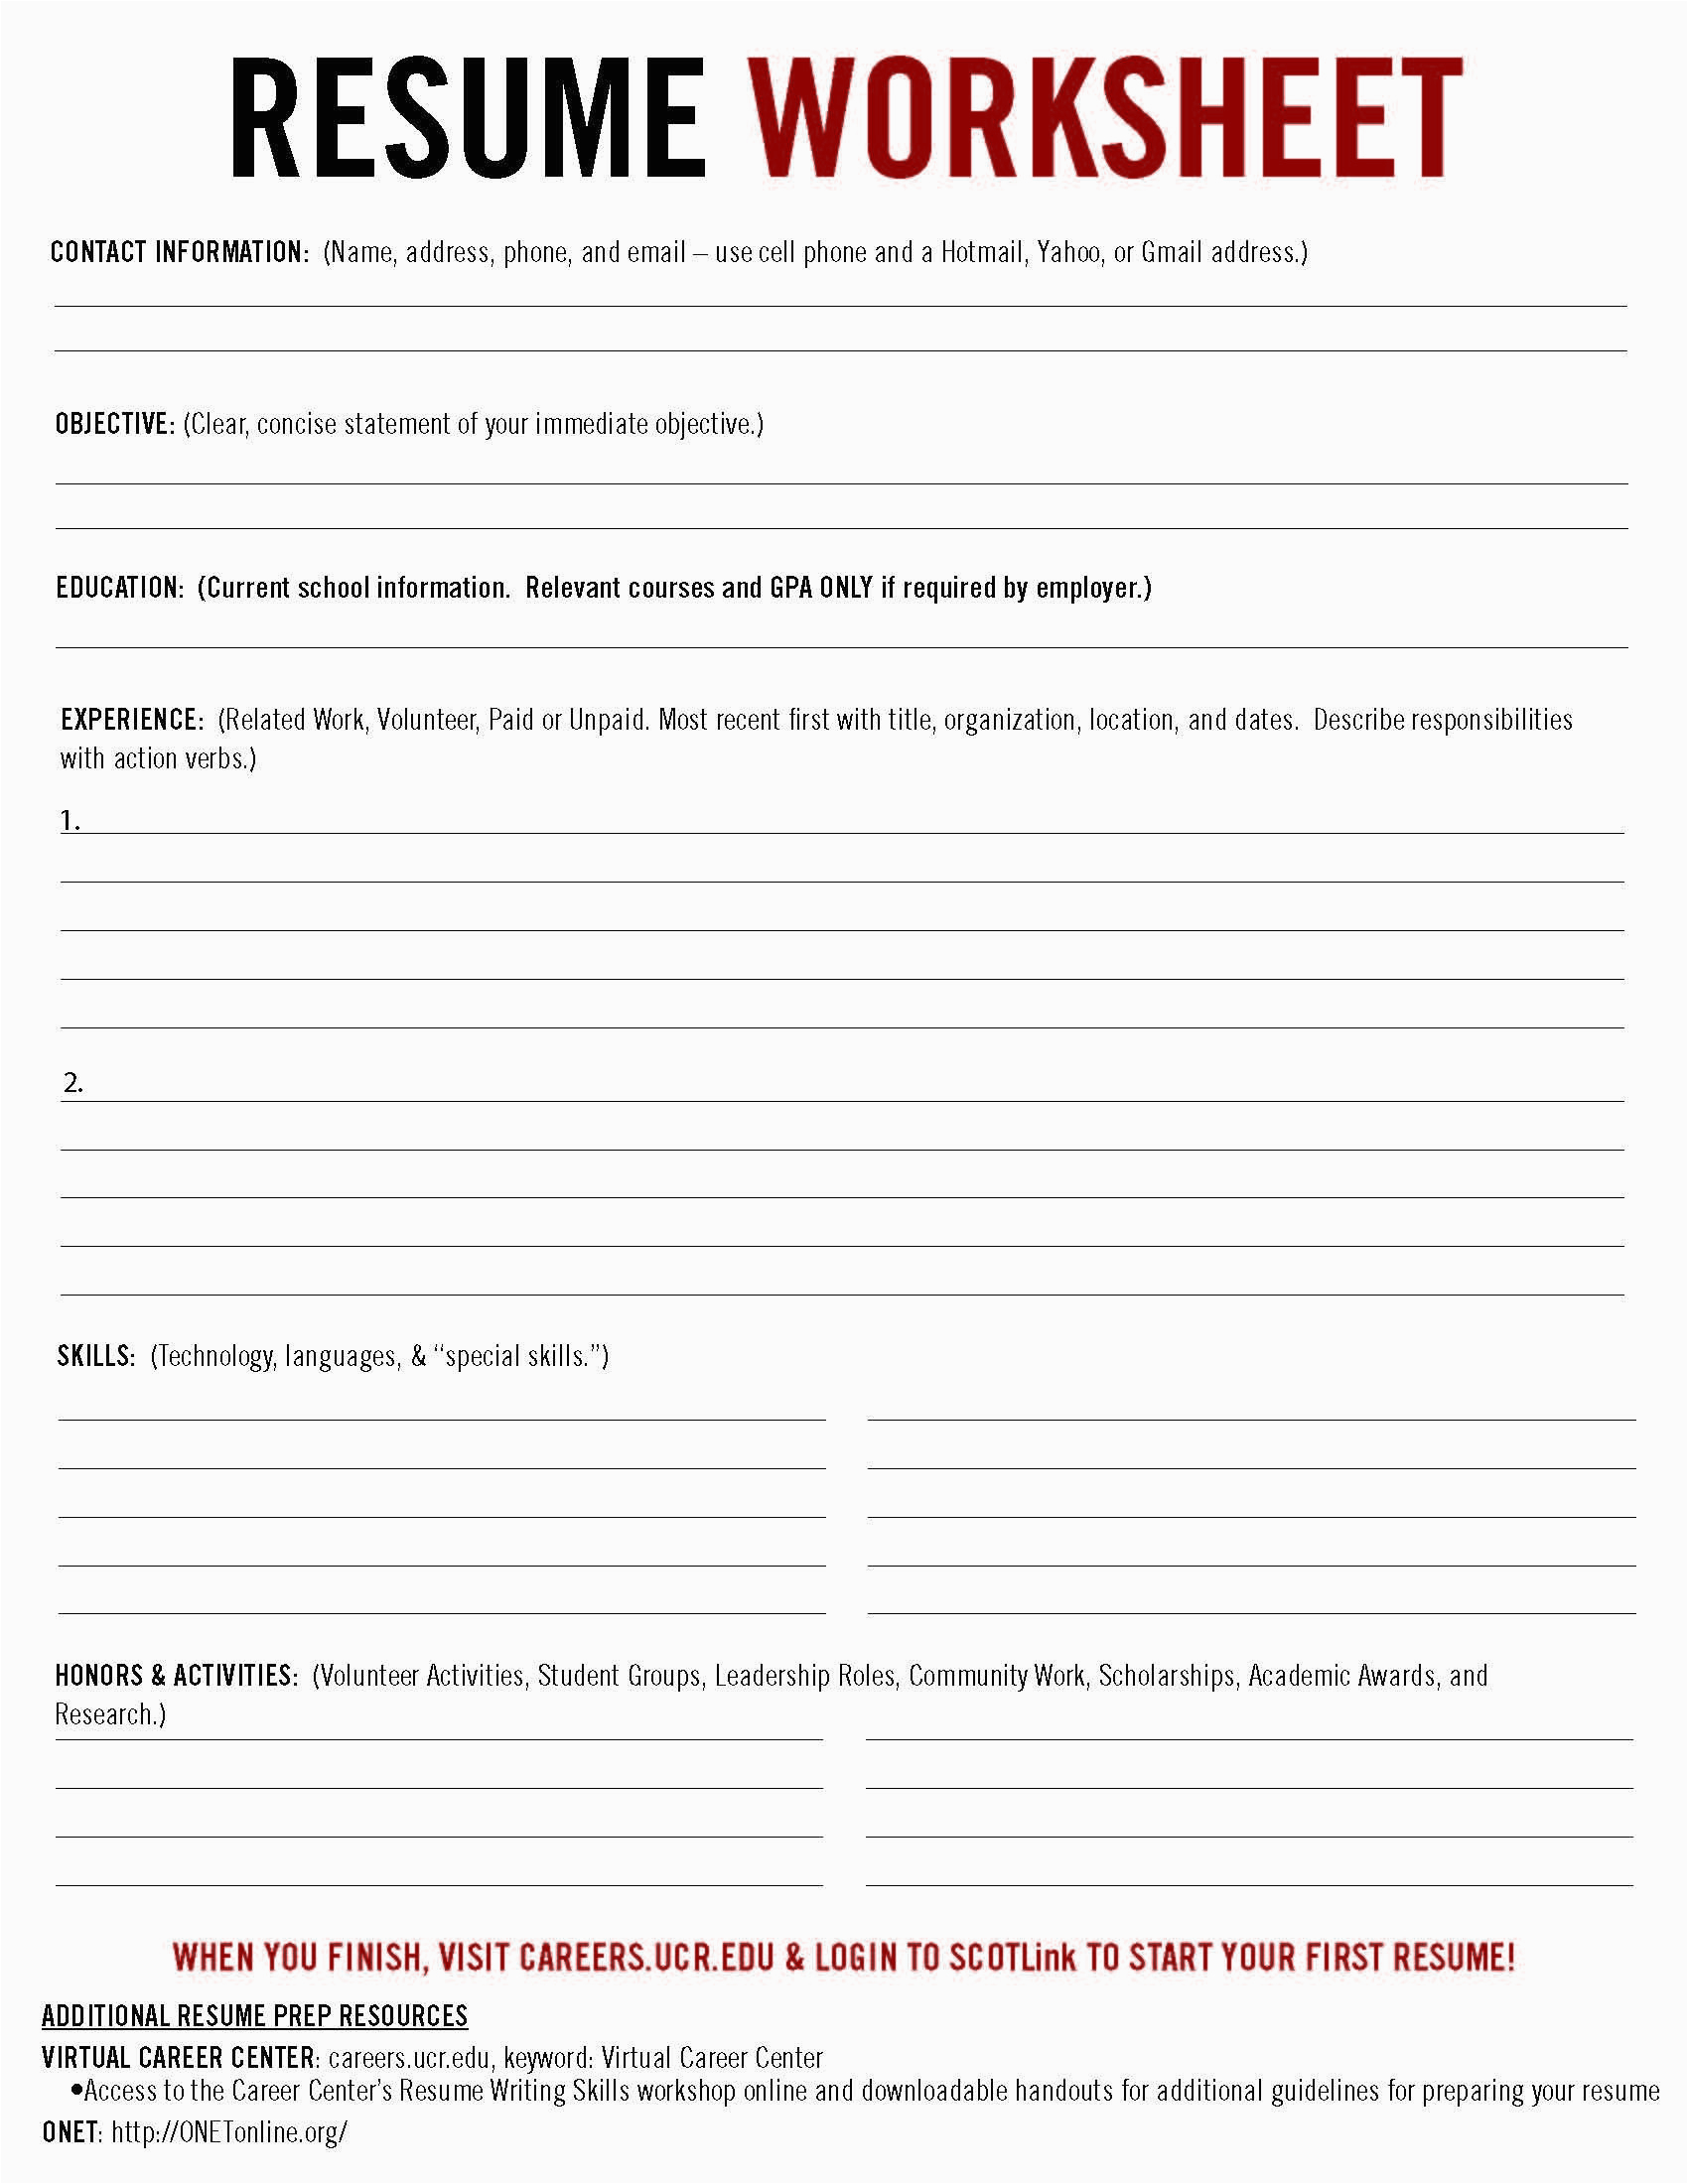 Fill In the Blank Resume Template for Highschool Students Amazing Fill In the Blank Resume Template for Highschool